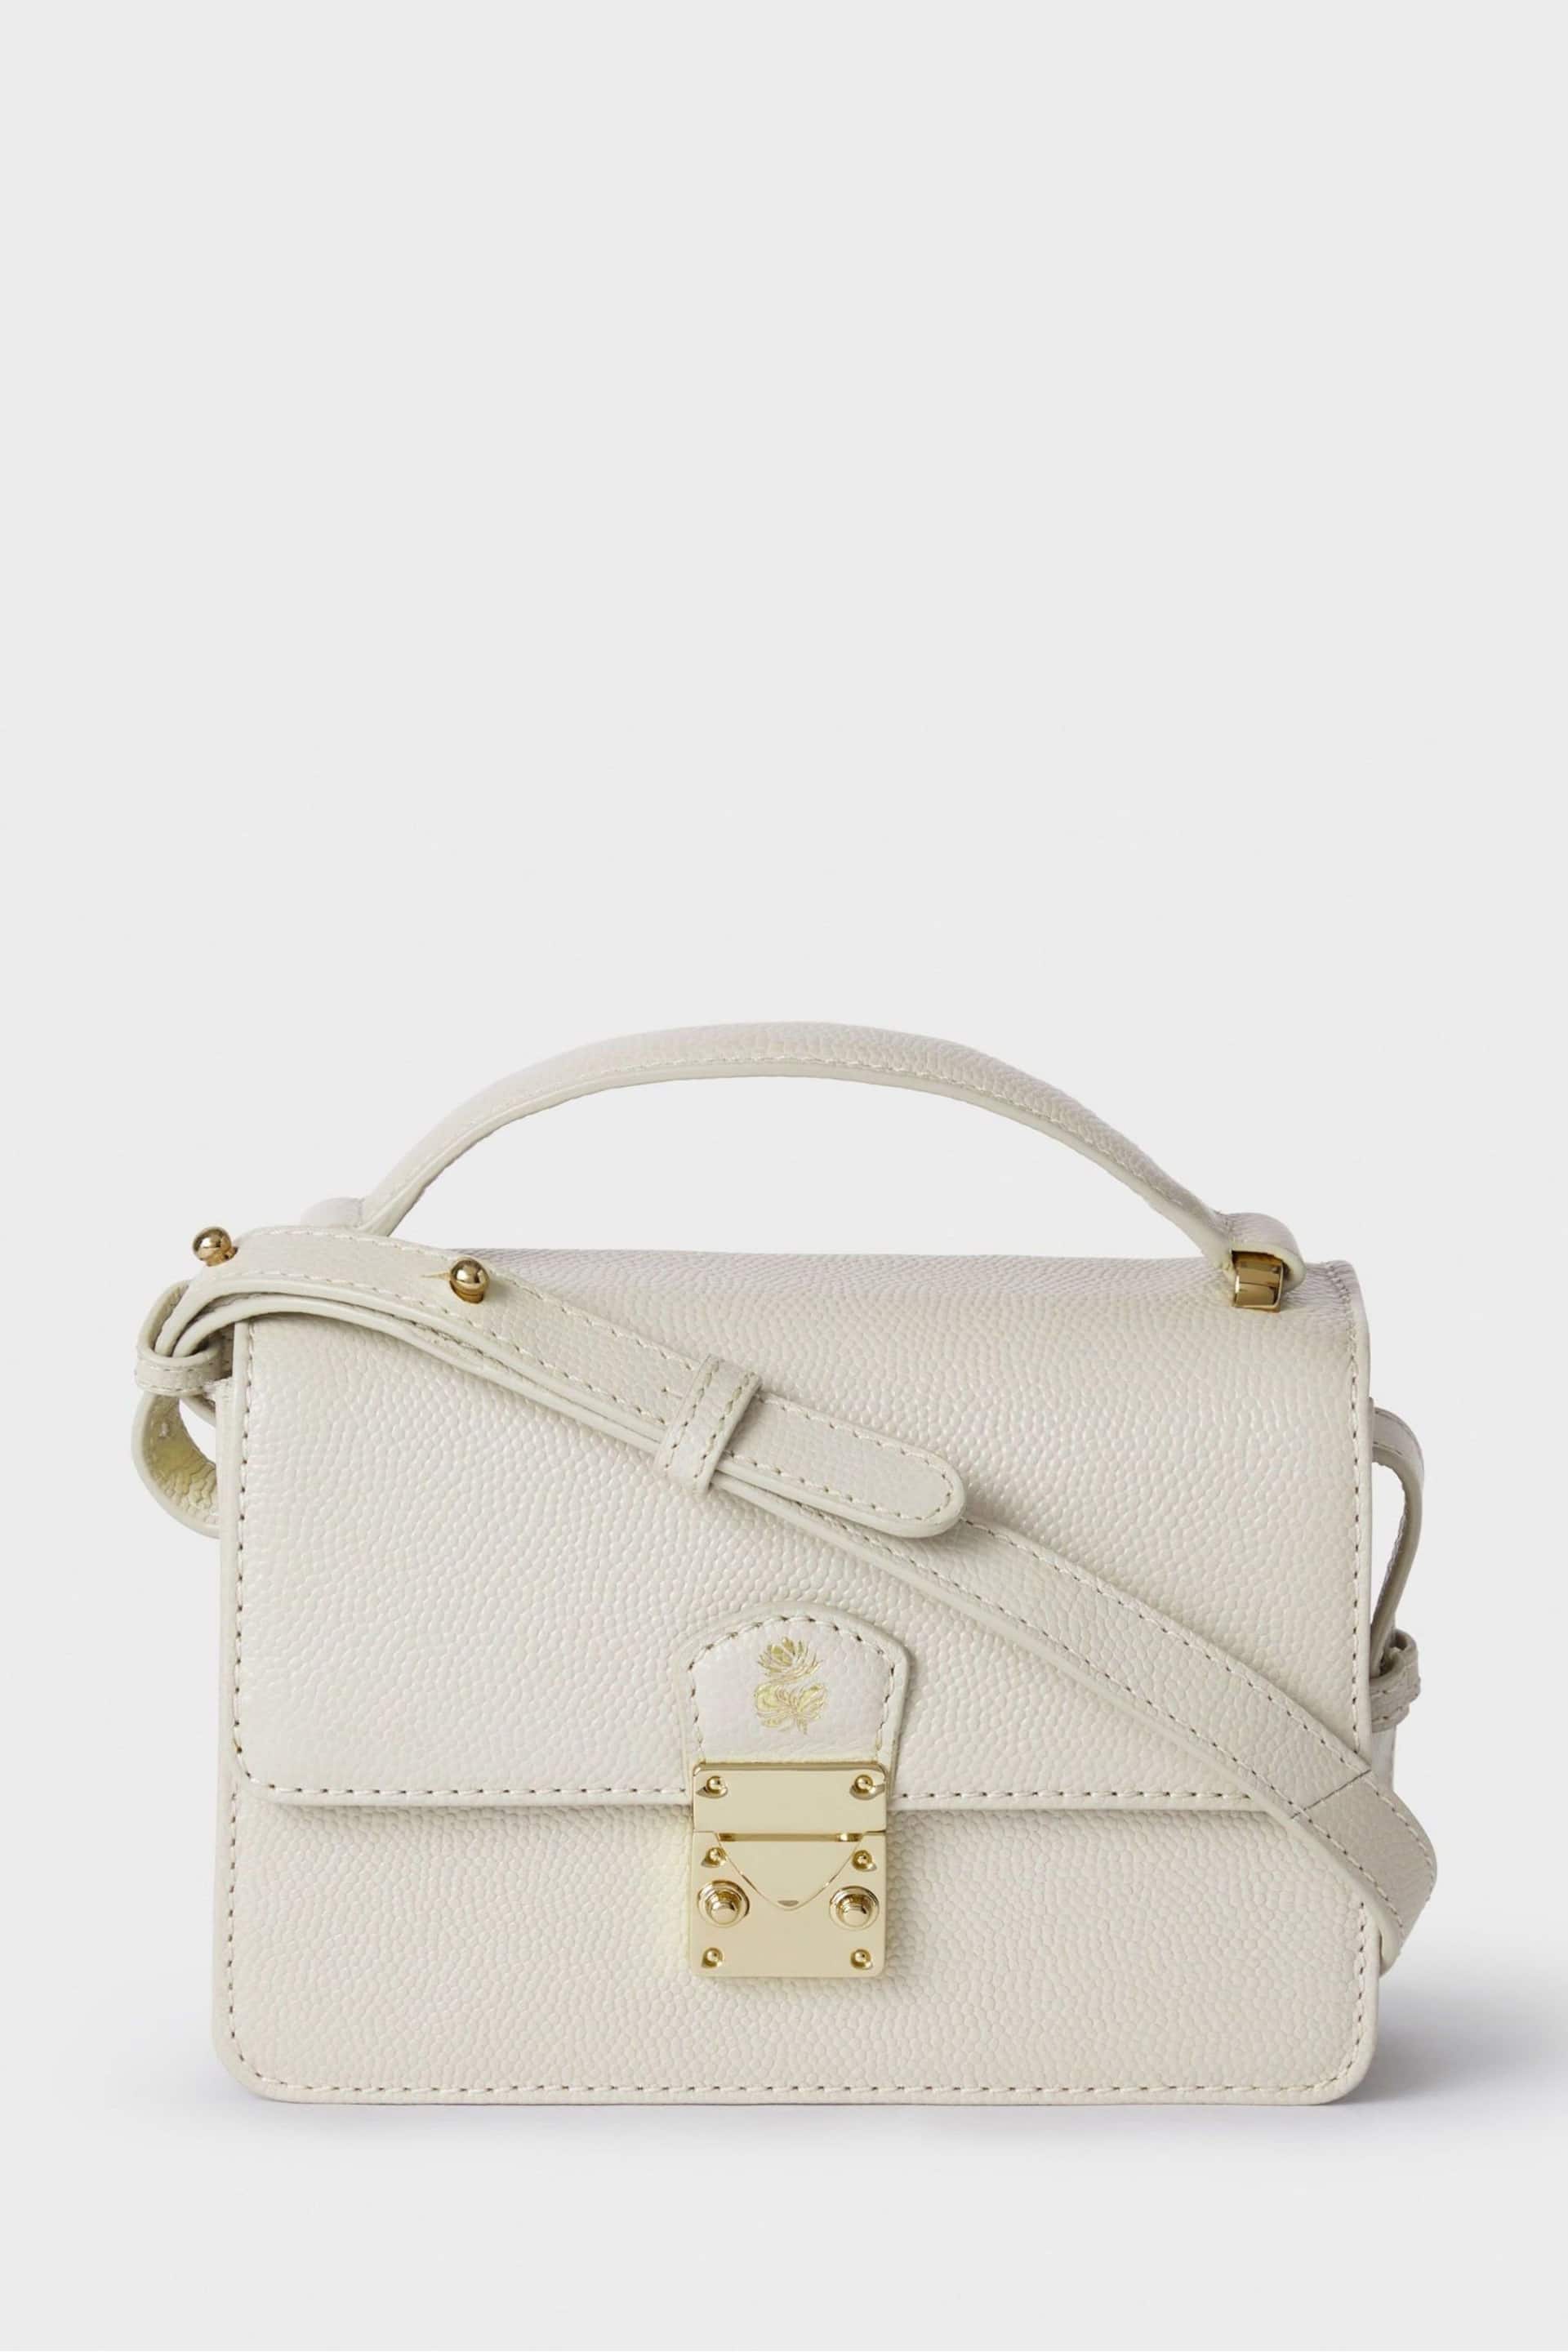 Osprey London The Dolly Leather Grab Bag - Image 2 of 6